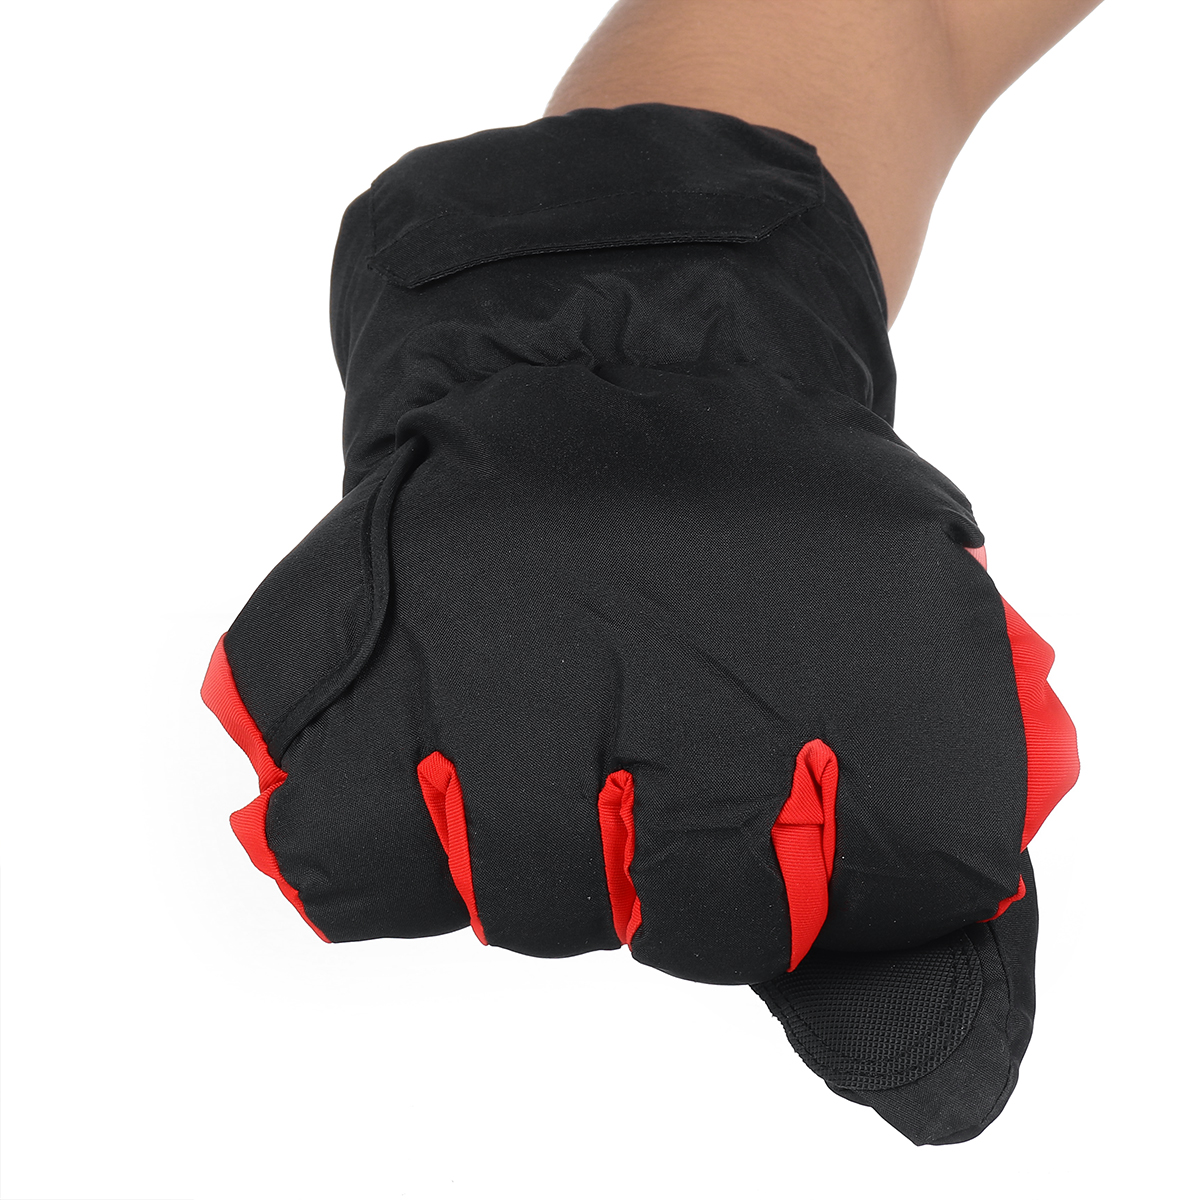 45V-Smart-Electric-Heated-Gloves-Winter-Ski-Cycling-Keep-Warm-Battery-Powered-Heating-Gloves-5-Finge-1771505-10